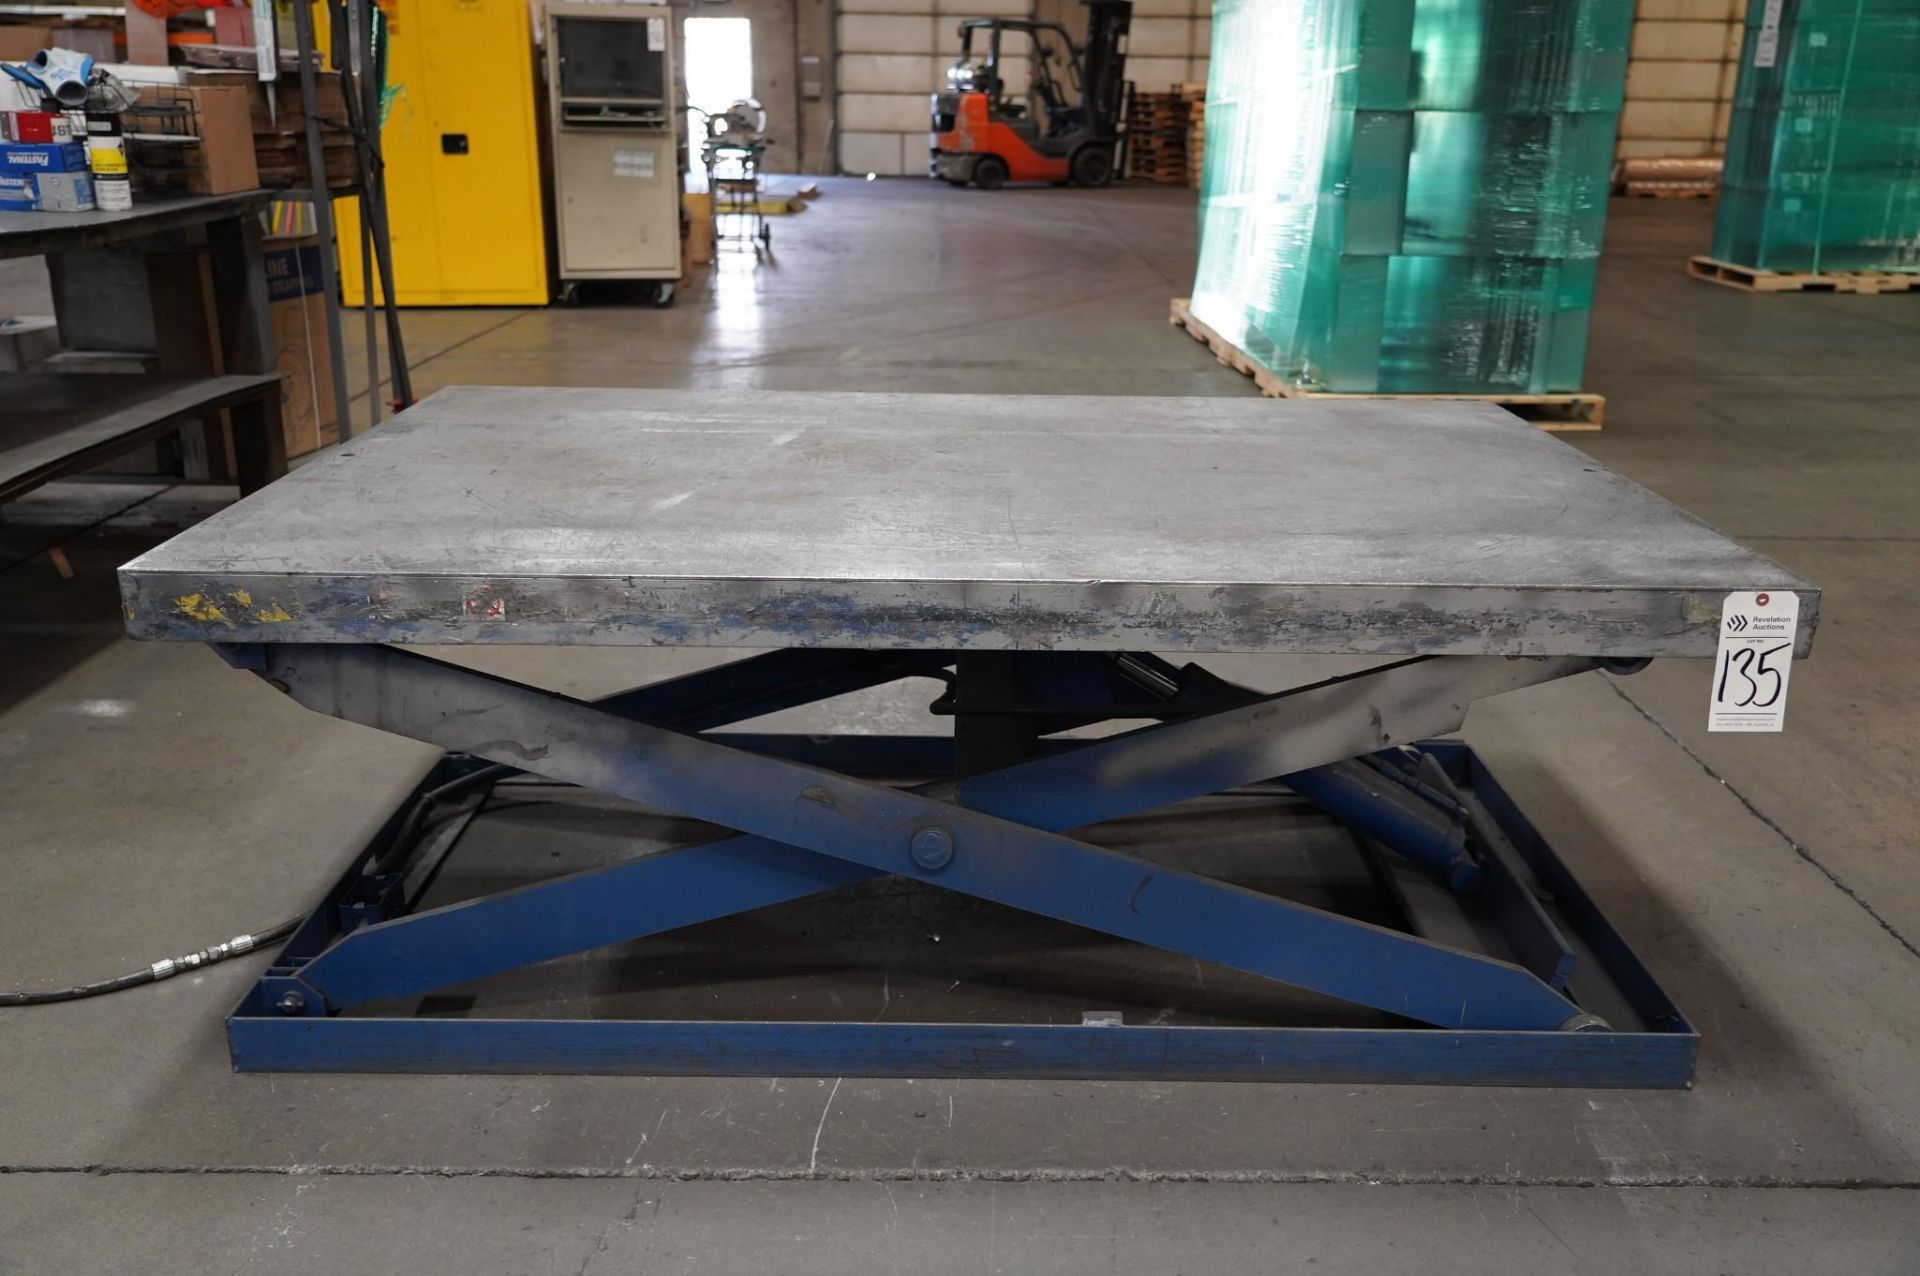 BLUE GIANT HYDRAULIC LIFT TABLE